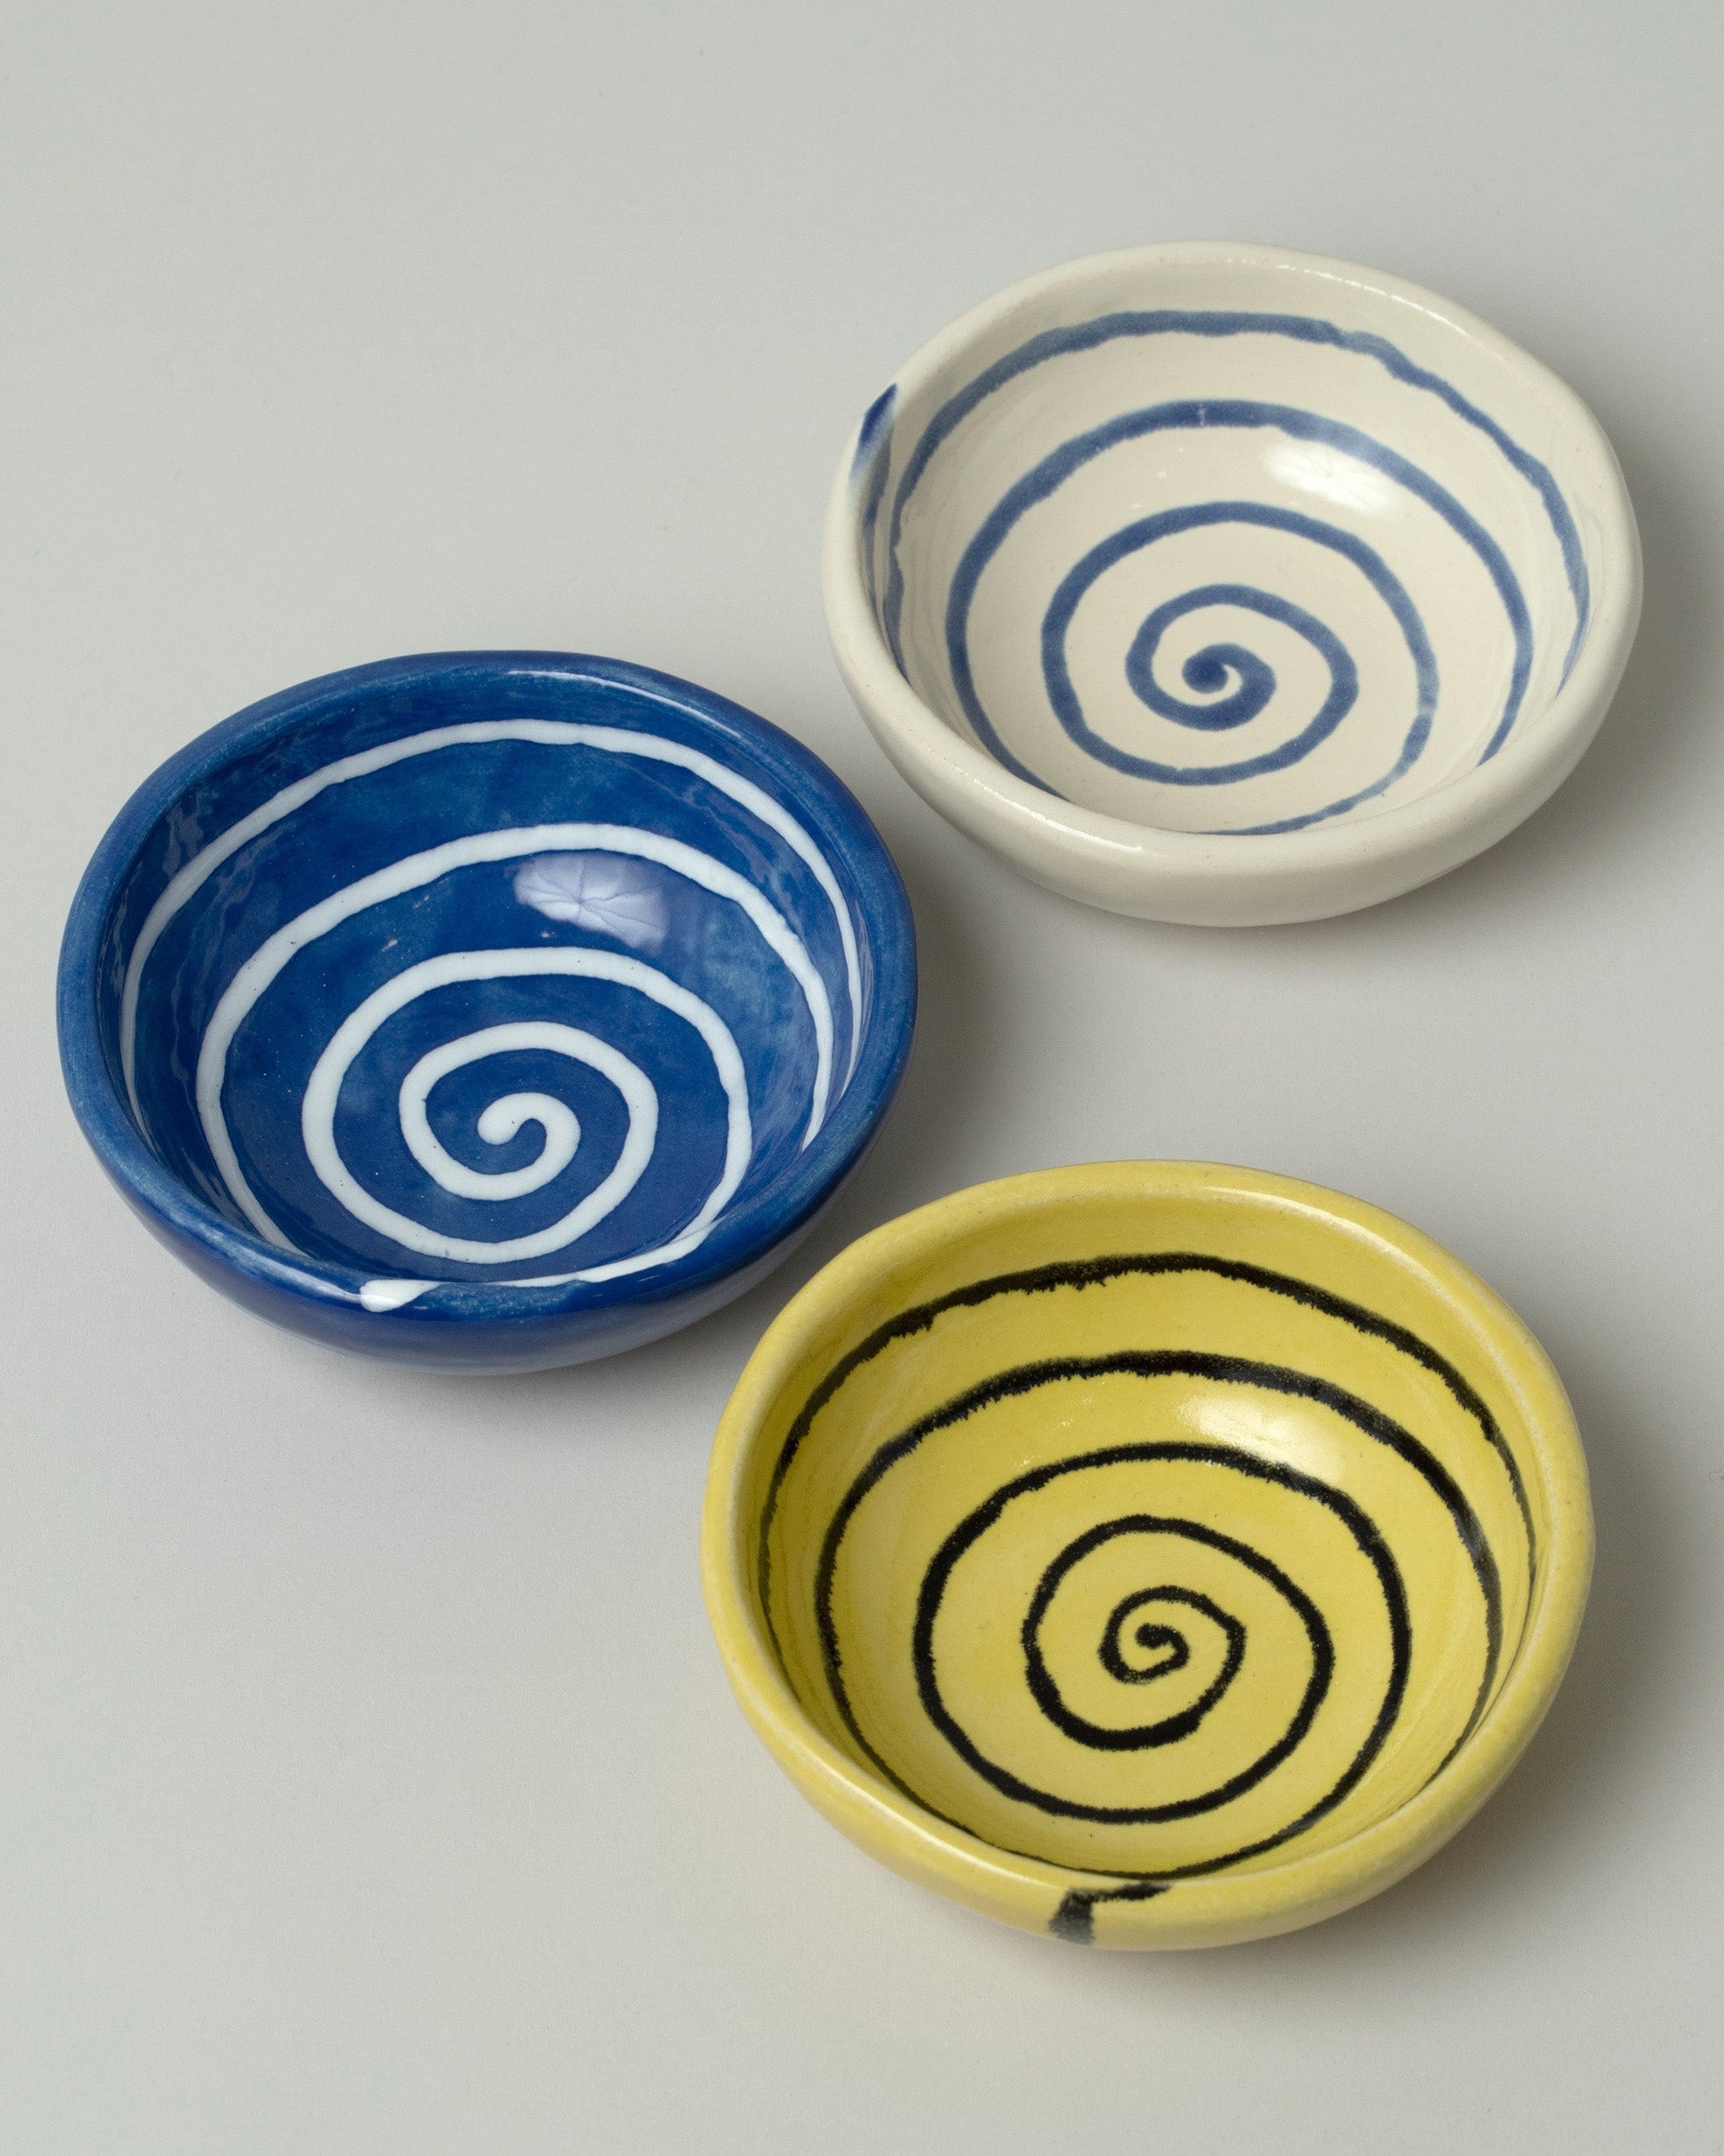 Closeup details of a group of Casa Veronica Leche, Sol and Azul Mini Vida Bowls on light color background.